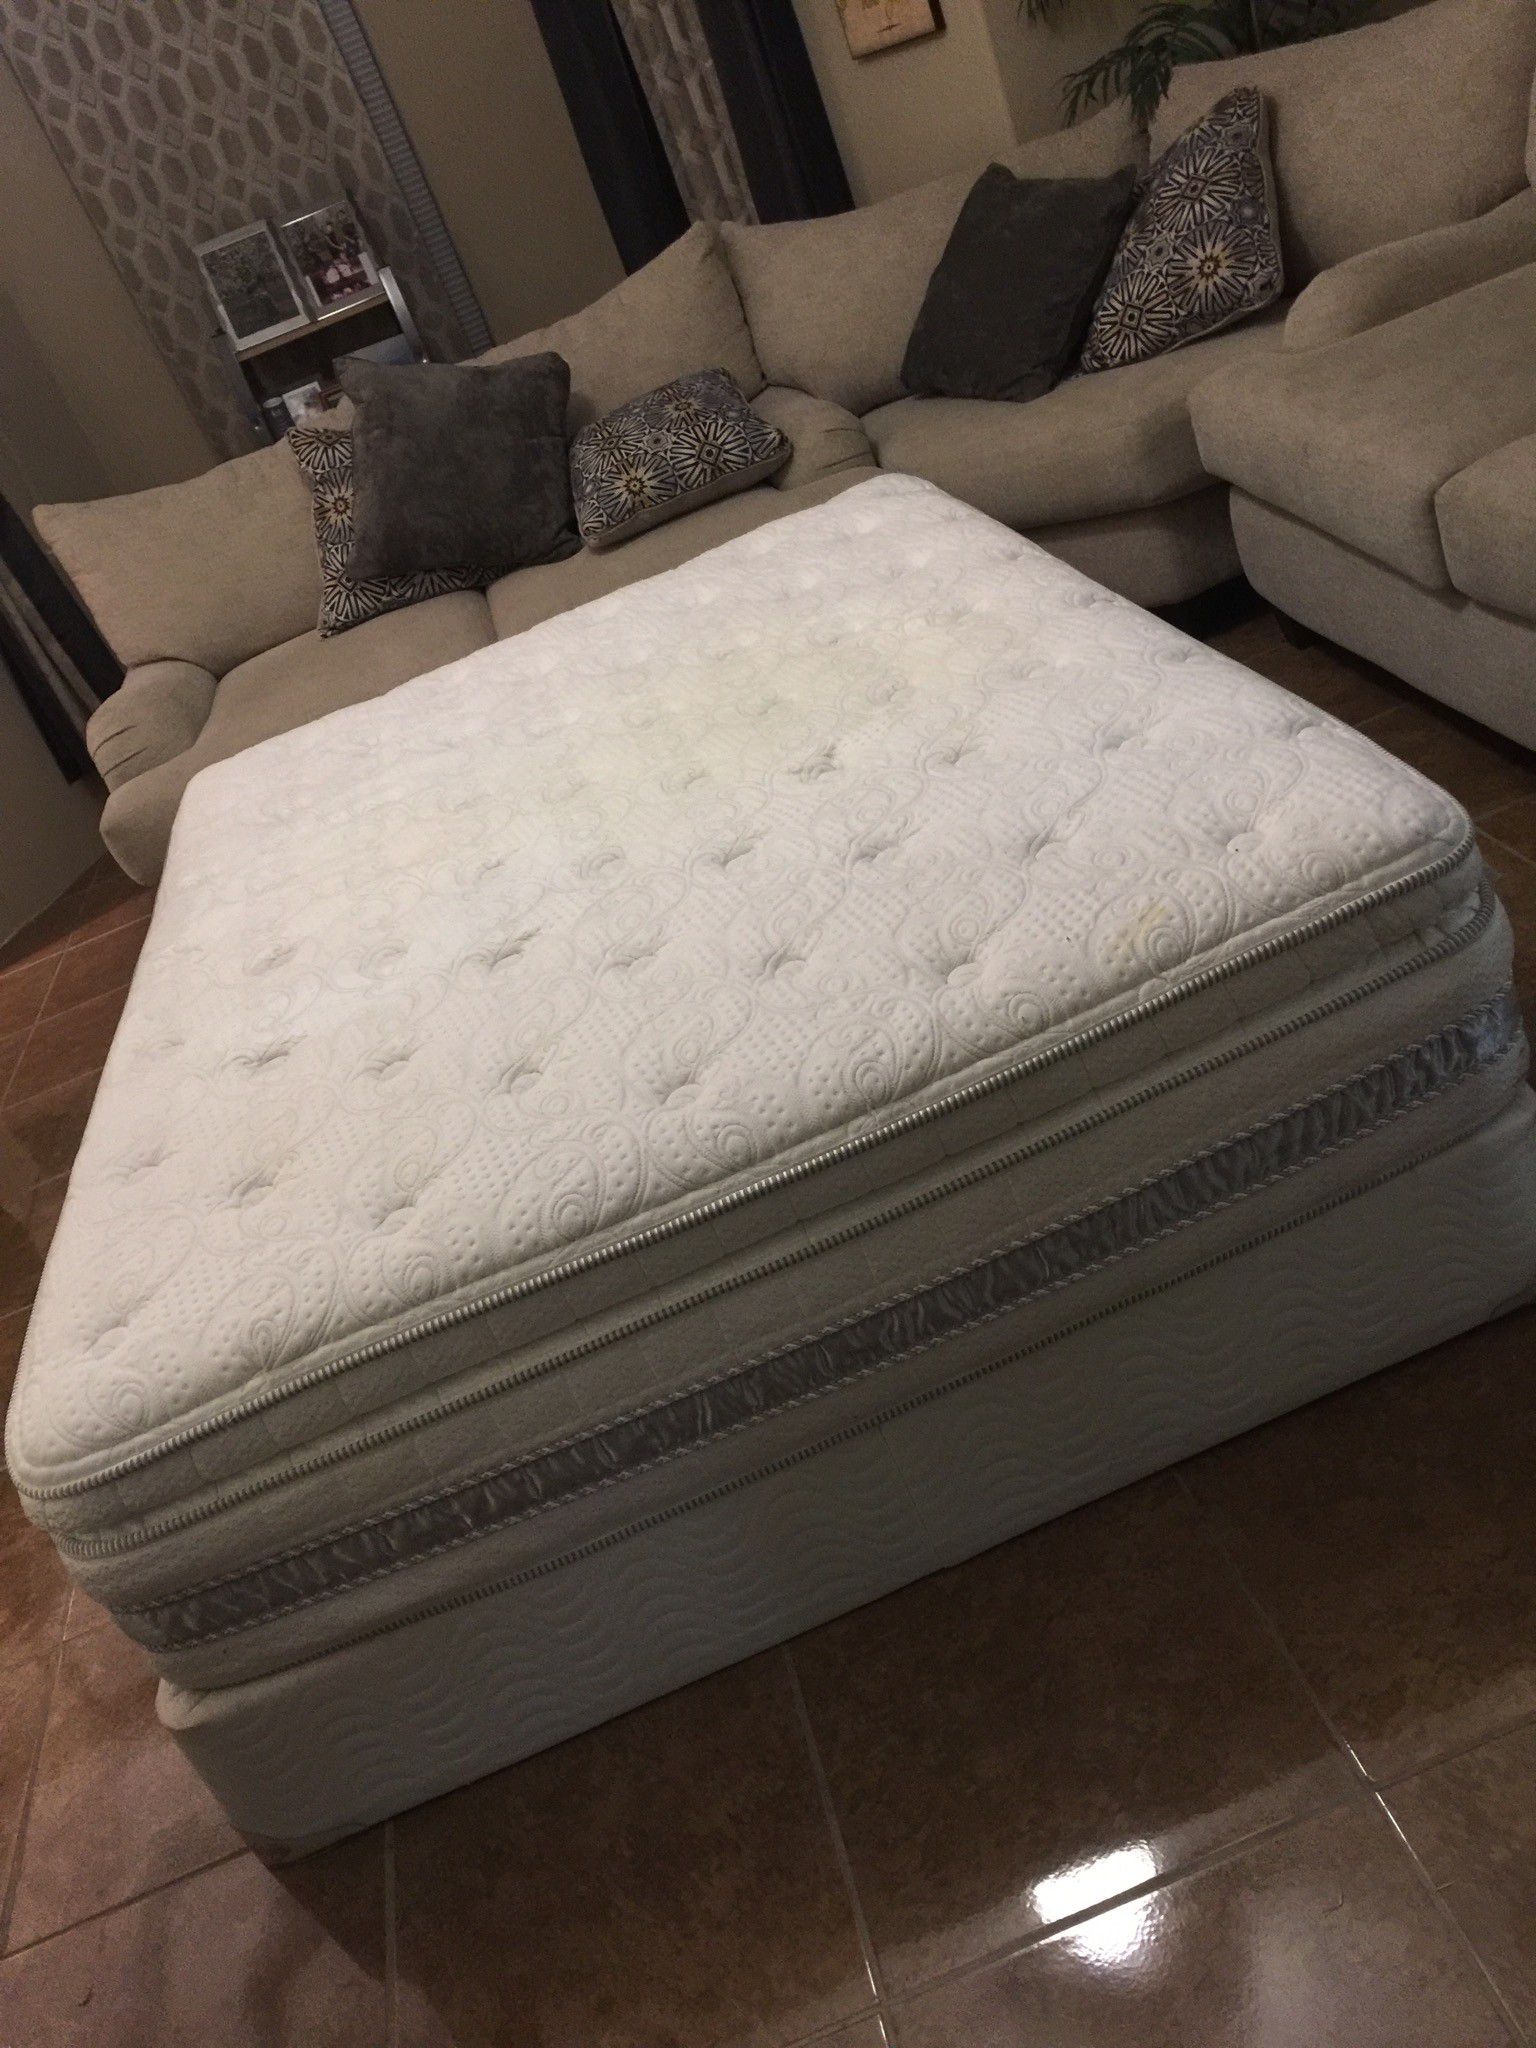 Serta perfect sleeper queen mattress and boxspring deliver for extra gas money